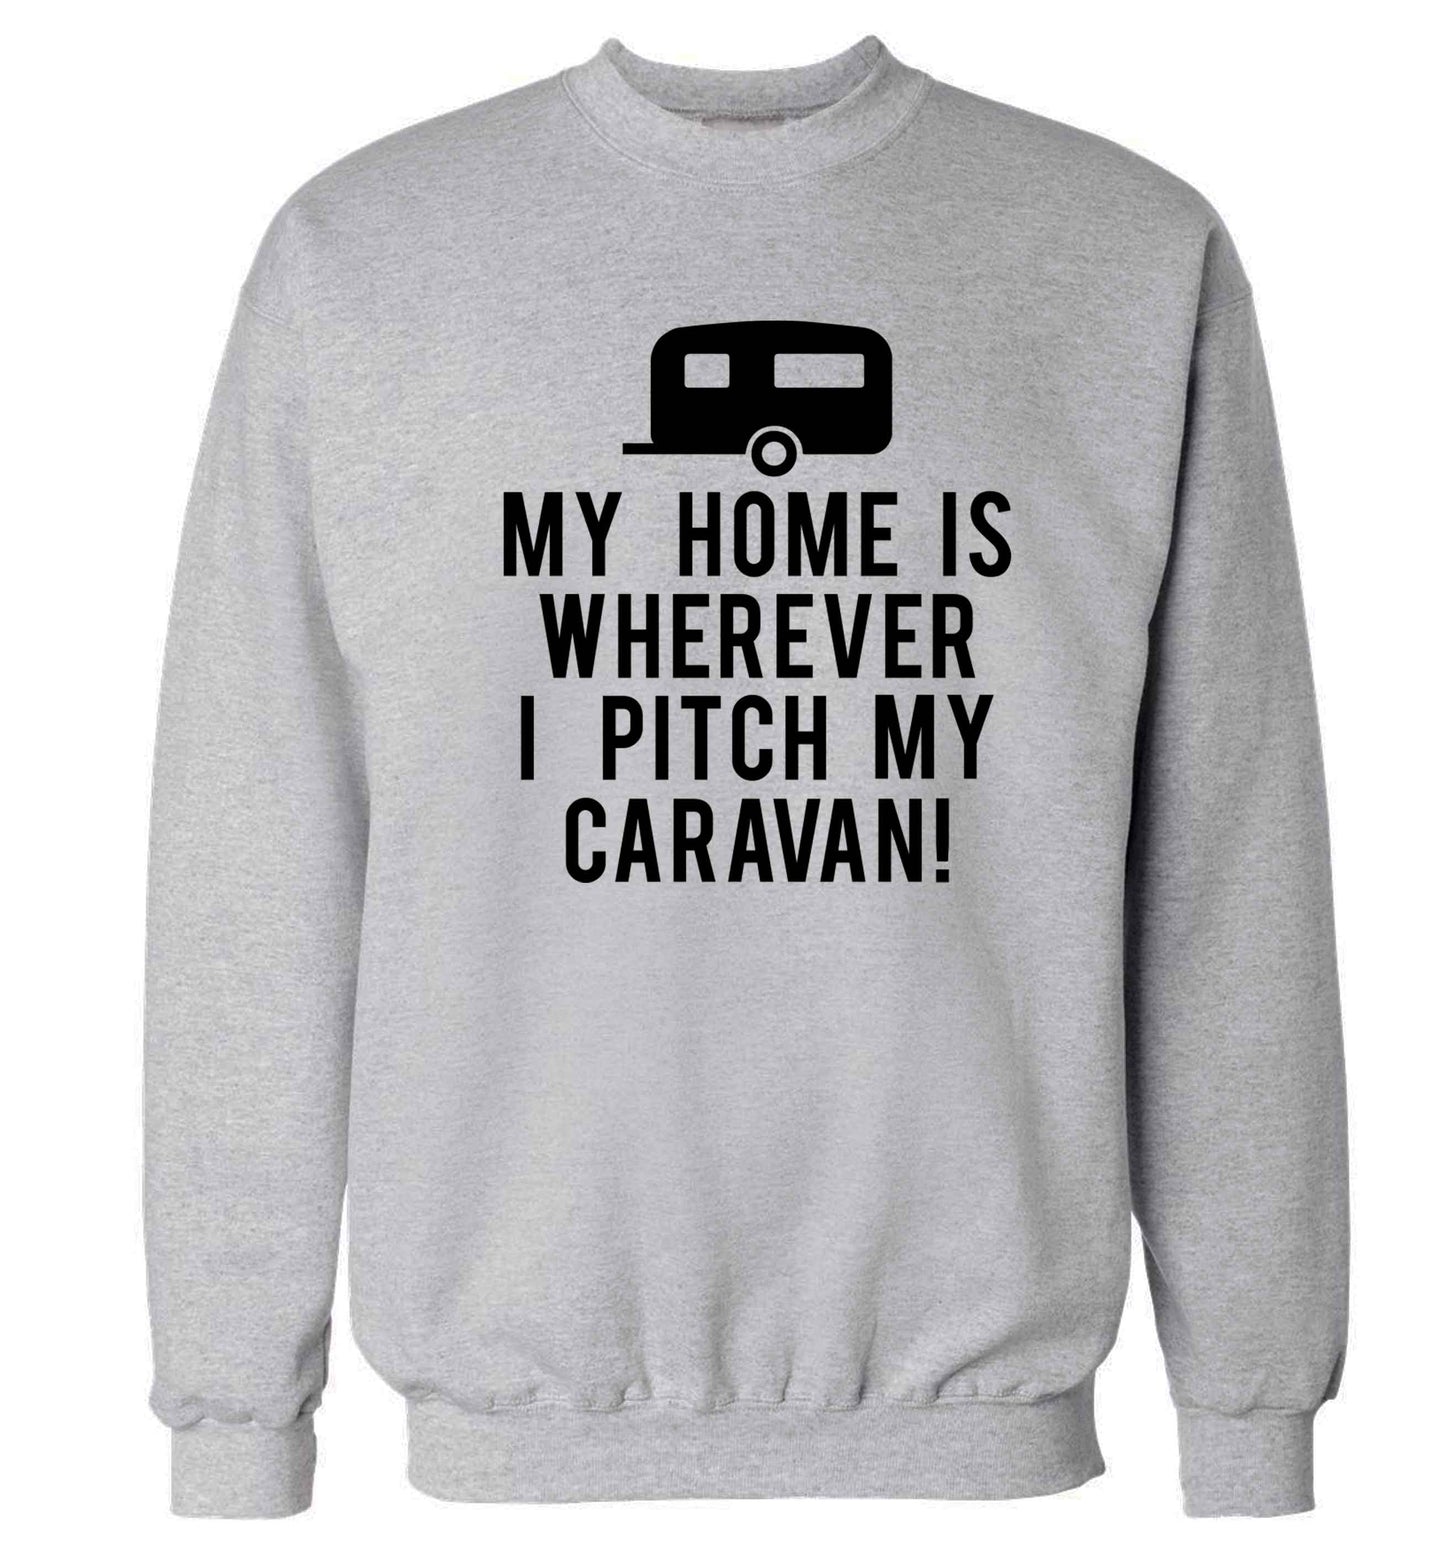 My home is wherever I pitch my caravan Adult's unisex grey Sweater 2XL